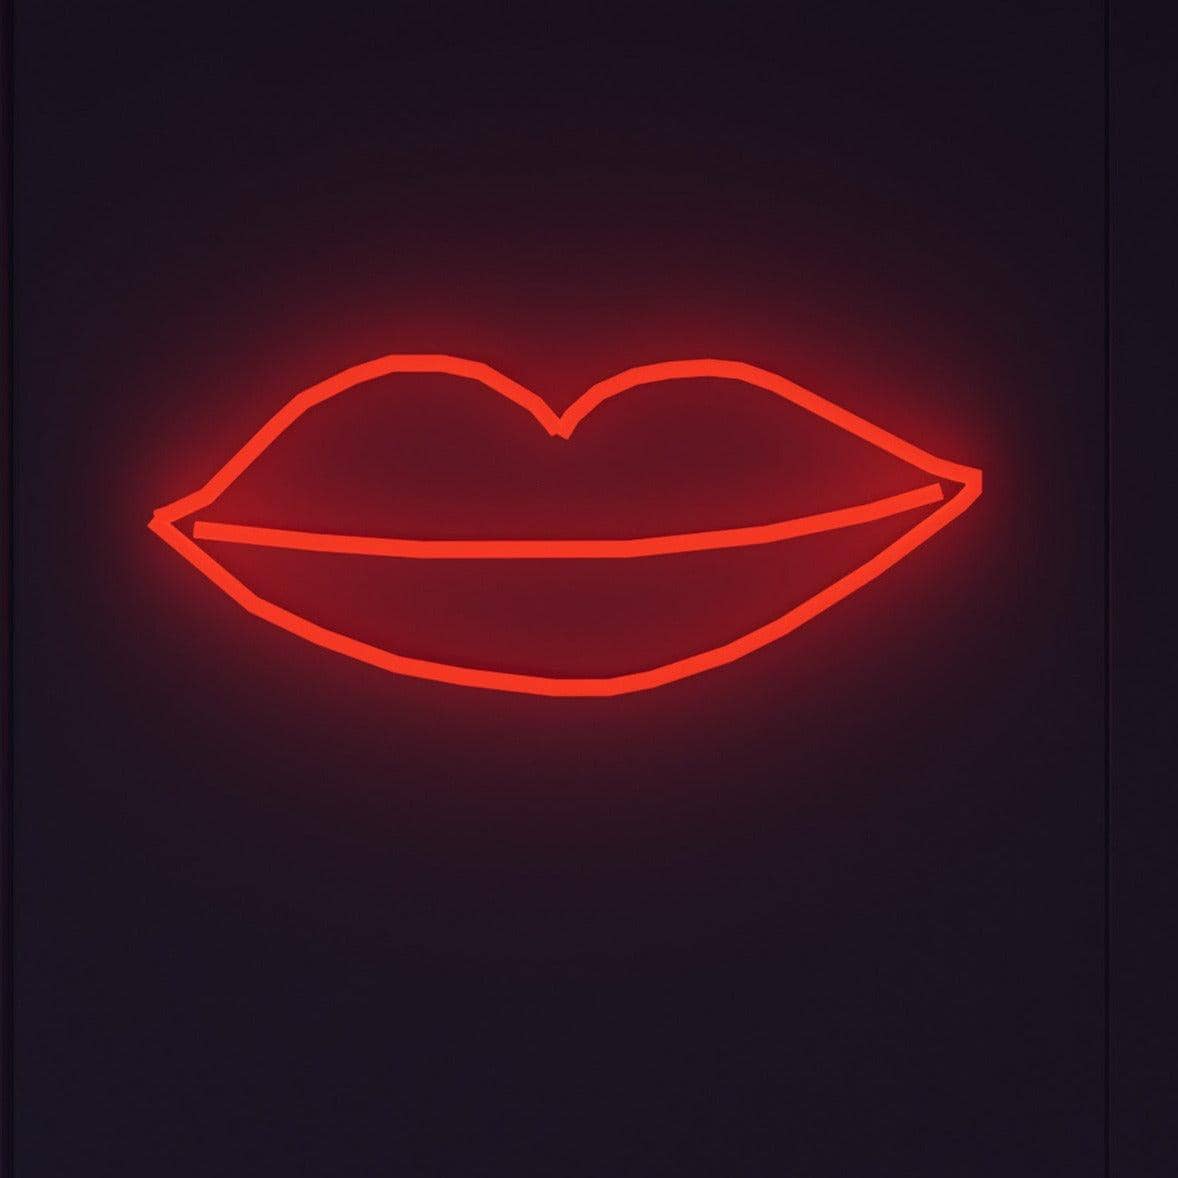 light-up-neon-lights-and-hang-them-in-your-bedroom-for-display-kissylips